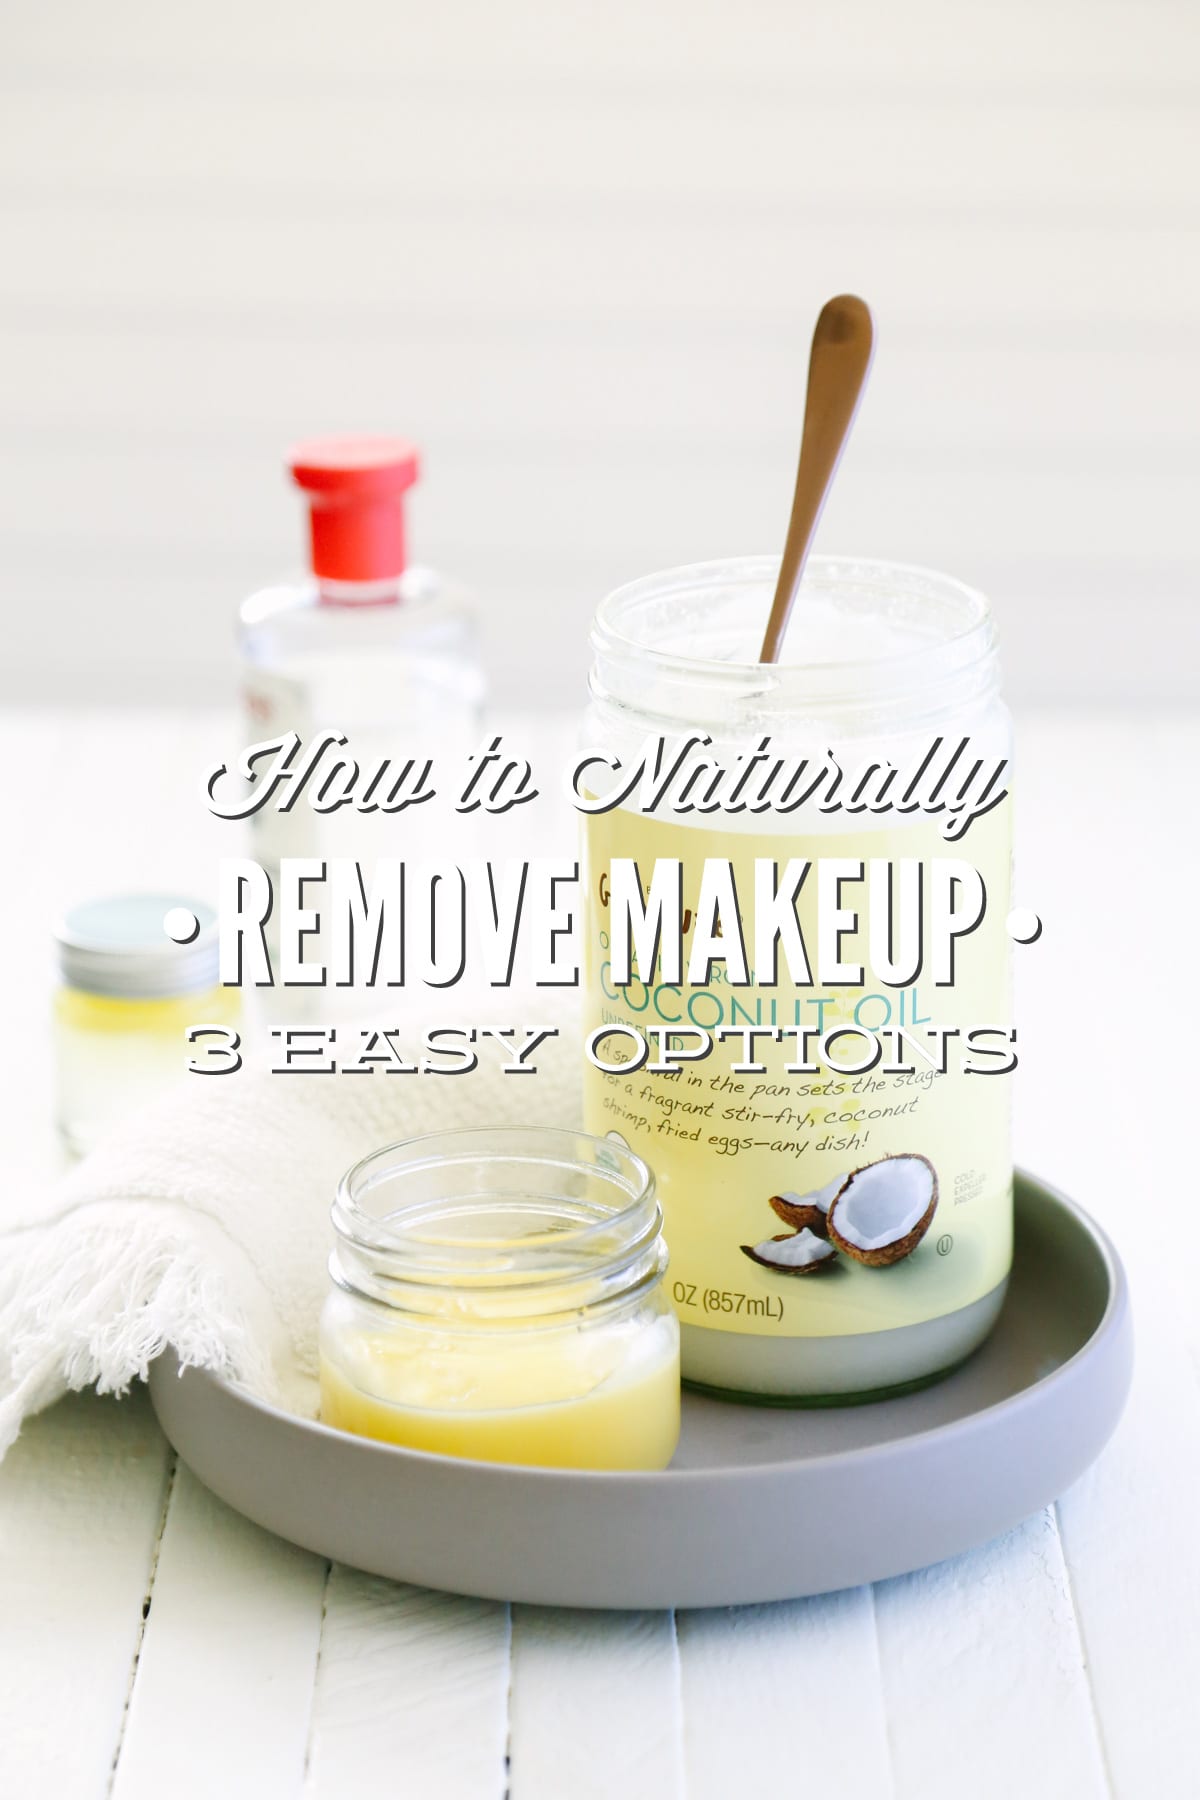 How to Naturally Remove Makeup: 3 Easy Makeup Remover Options